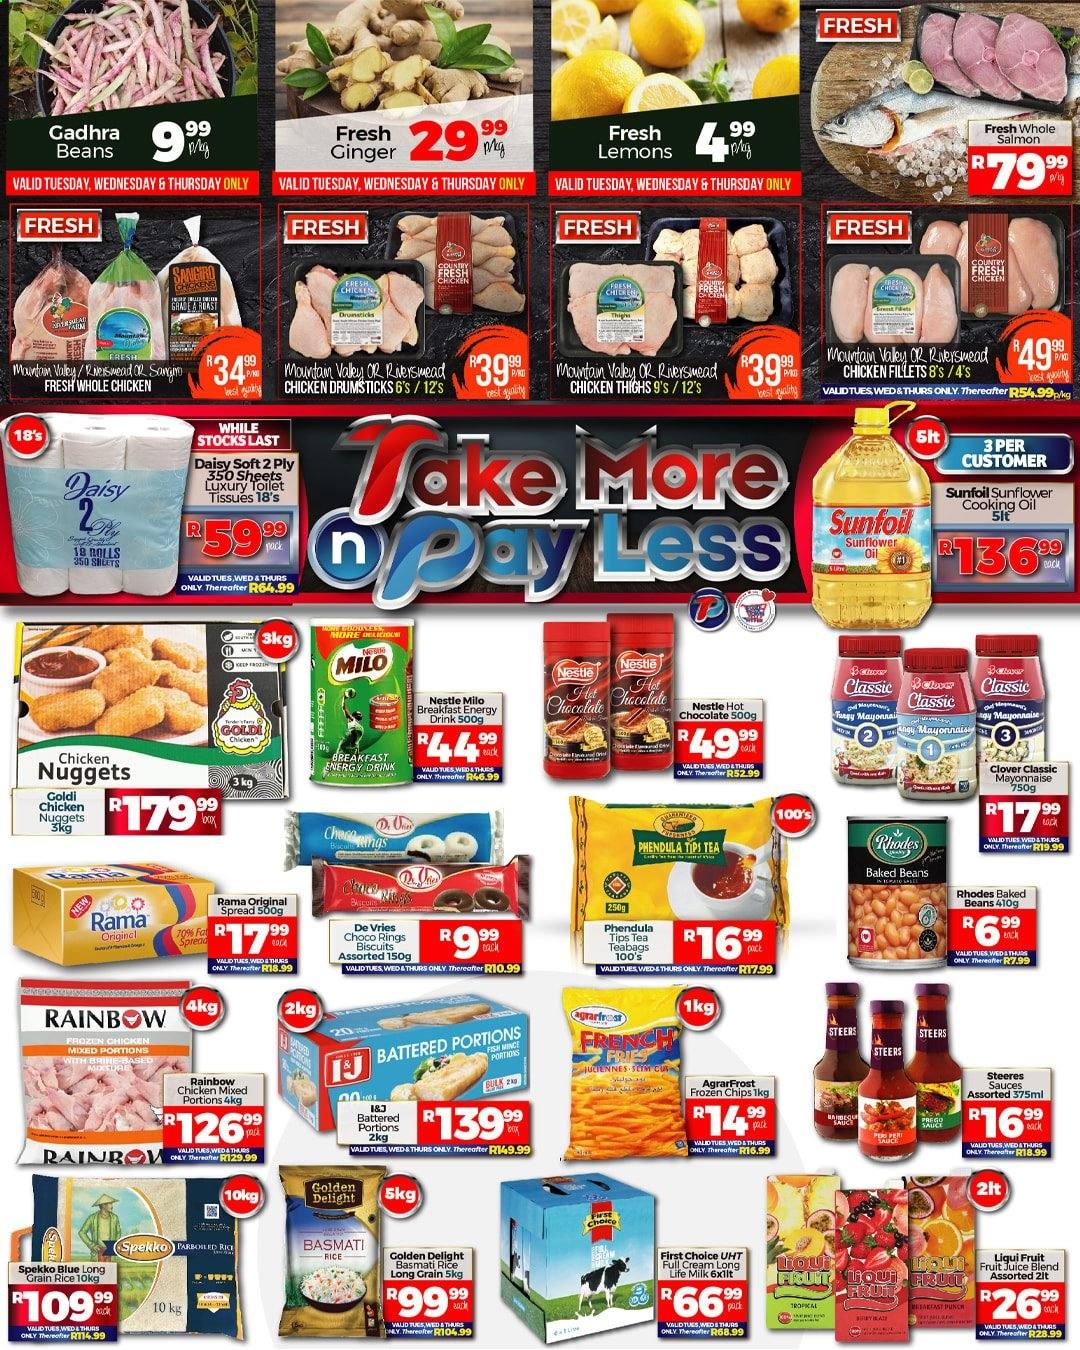 Take n Pay specials - 06.08.2021 - 06.13.2021. 